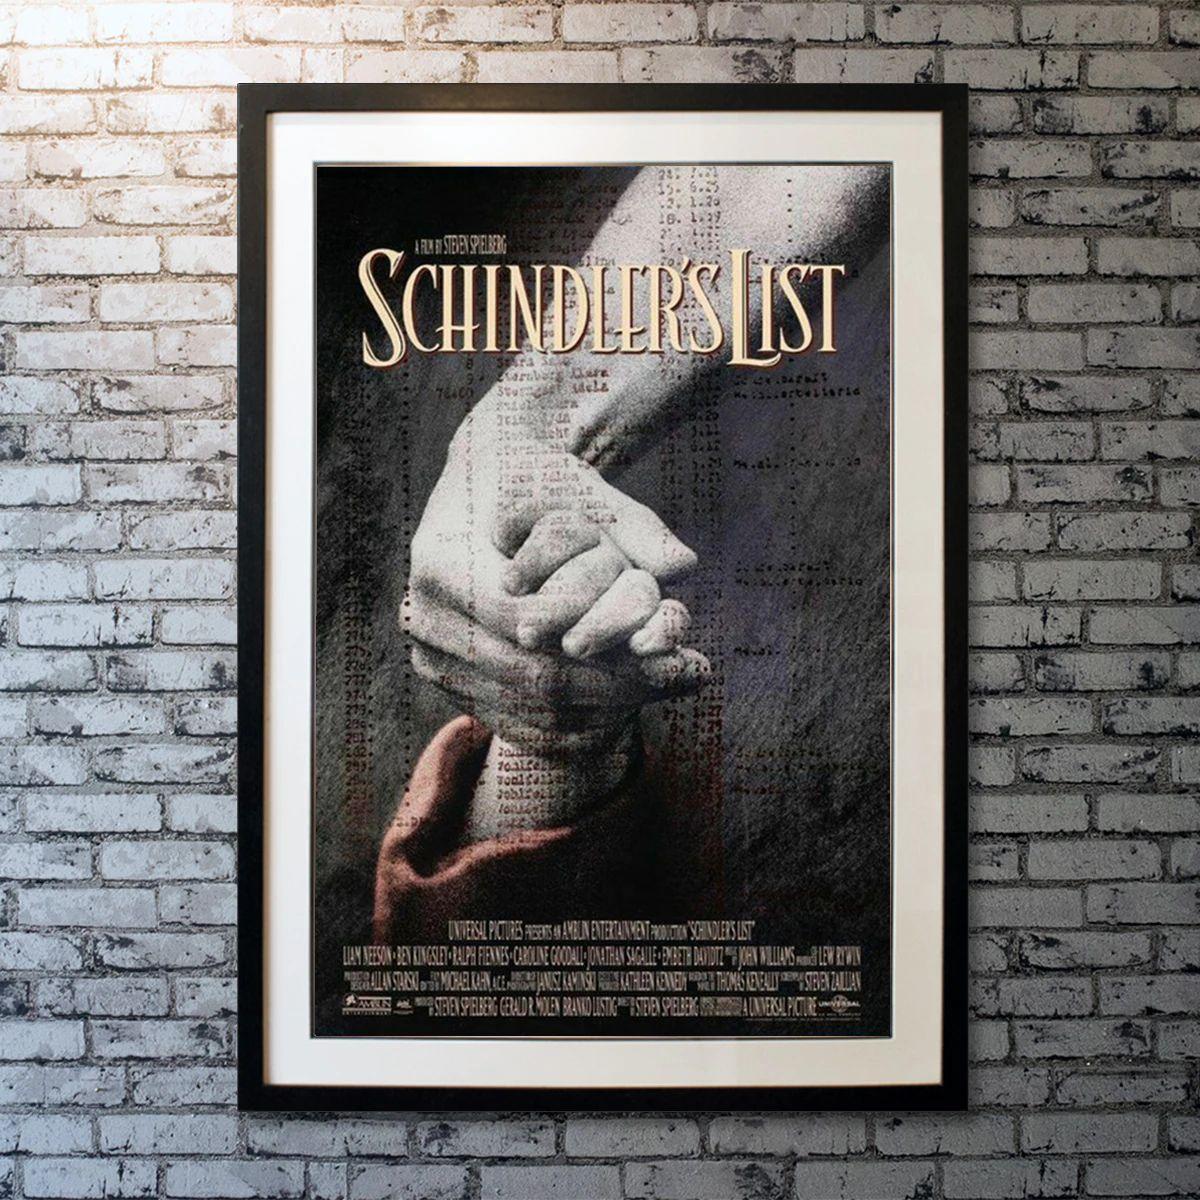 Schindler's List, Unframed Poster (1993)

Original One Sheet (27 X 40 Inches). In German-occupied Poland during World War II, industrialist Oskar Schindler gradually becomes concerned for his Jewish workforce after witnessing their persecution by